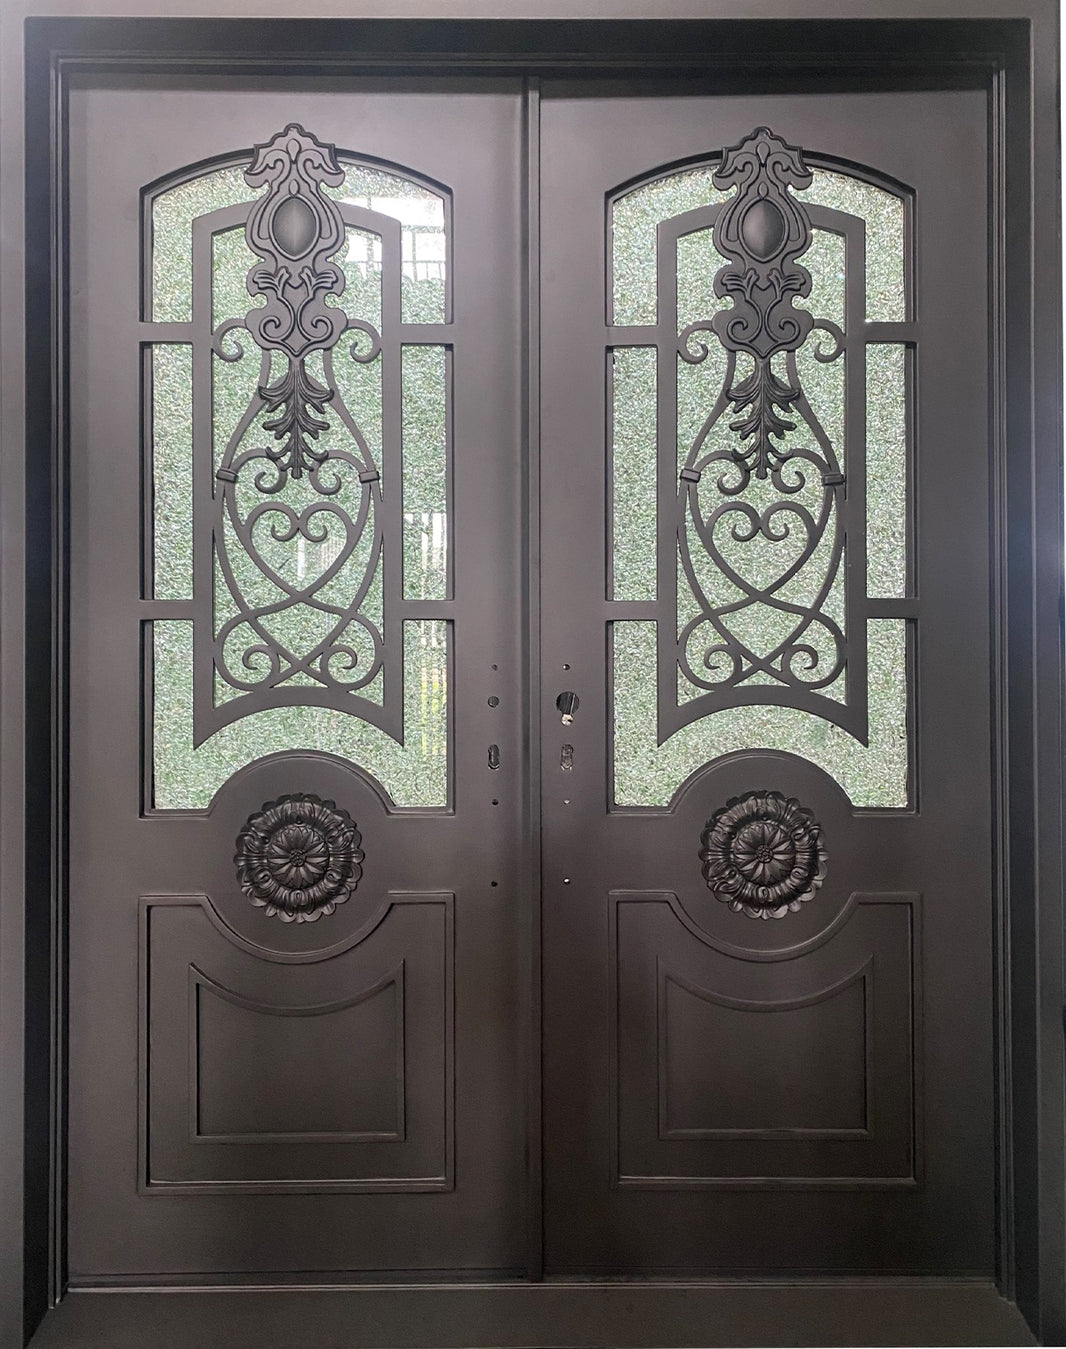 Classic Wrought Iron Door Design | Square Top With kickplate | Model # IWD 1006